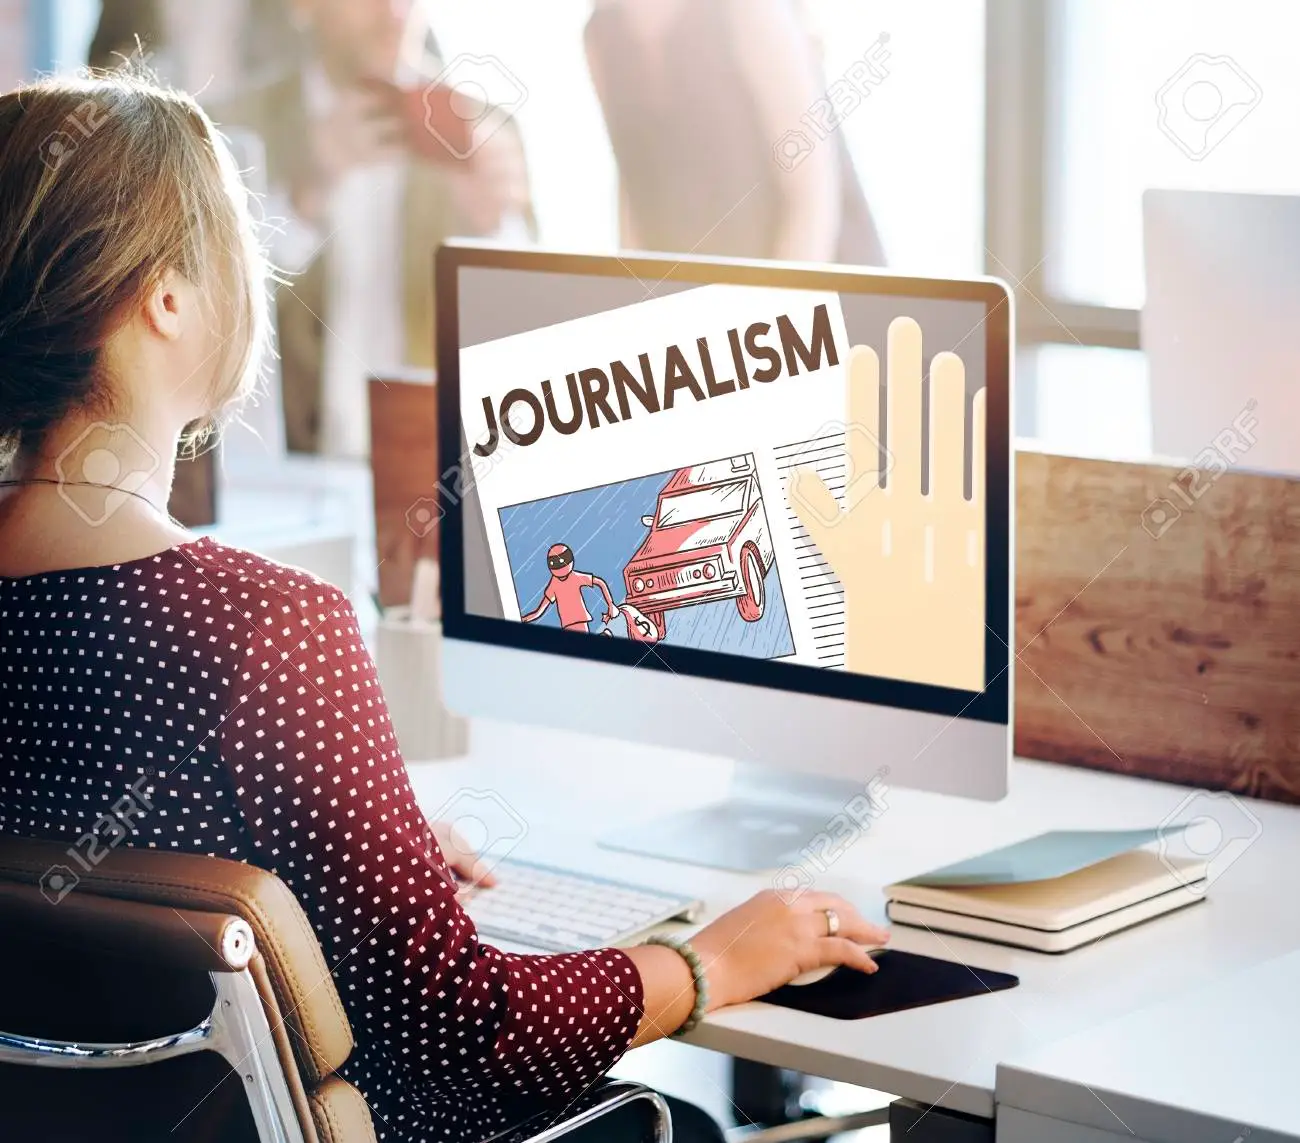 Journalism and the Rise of Social Media